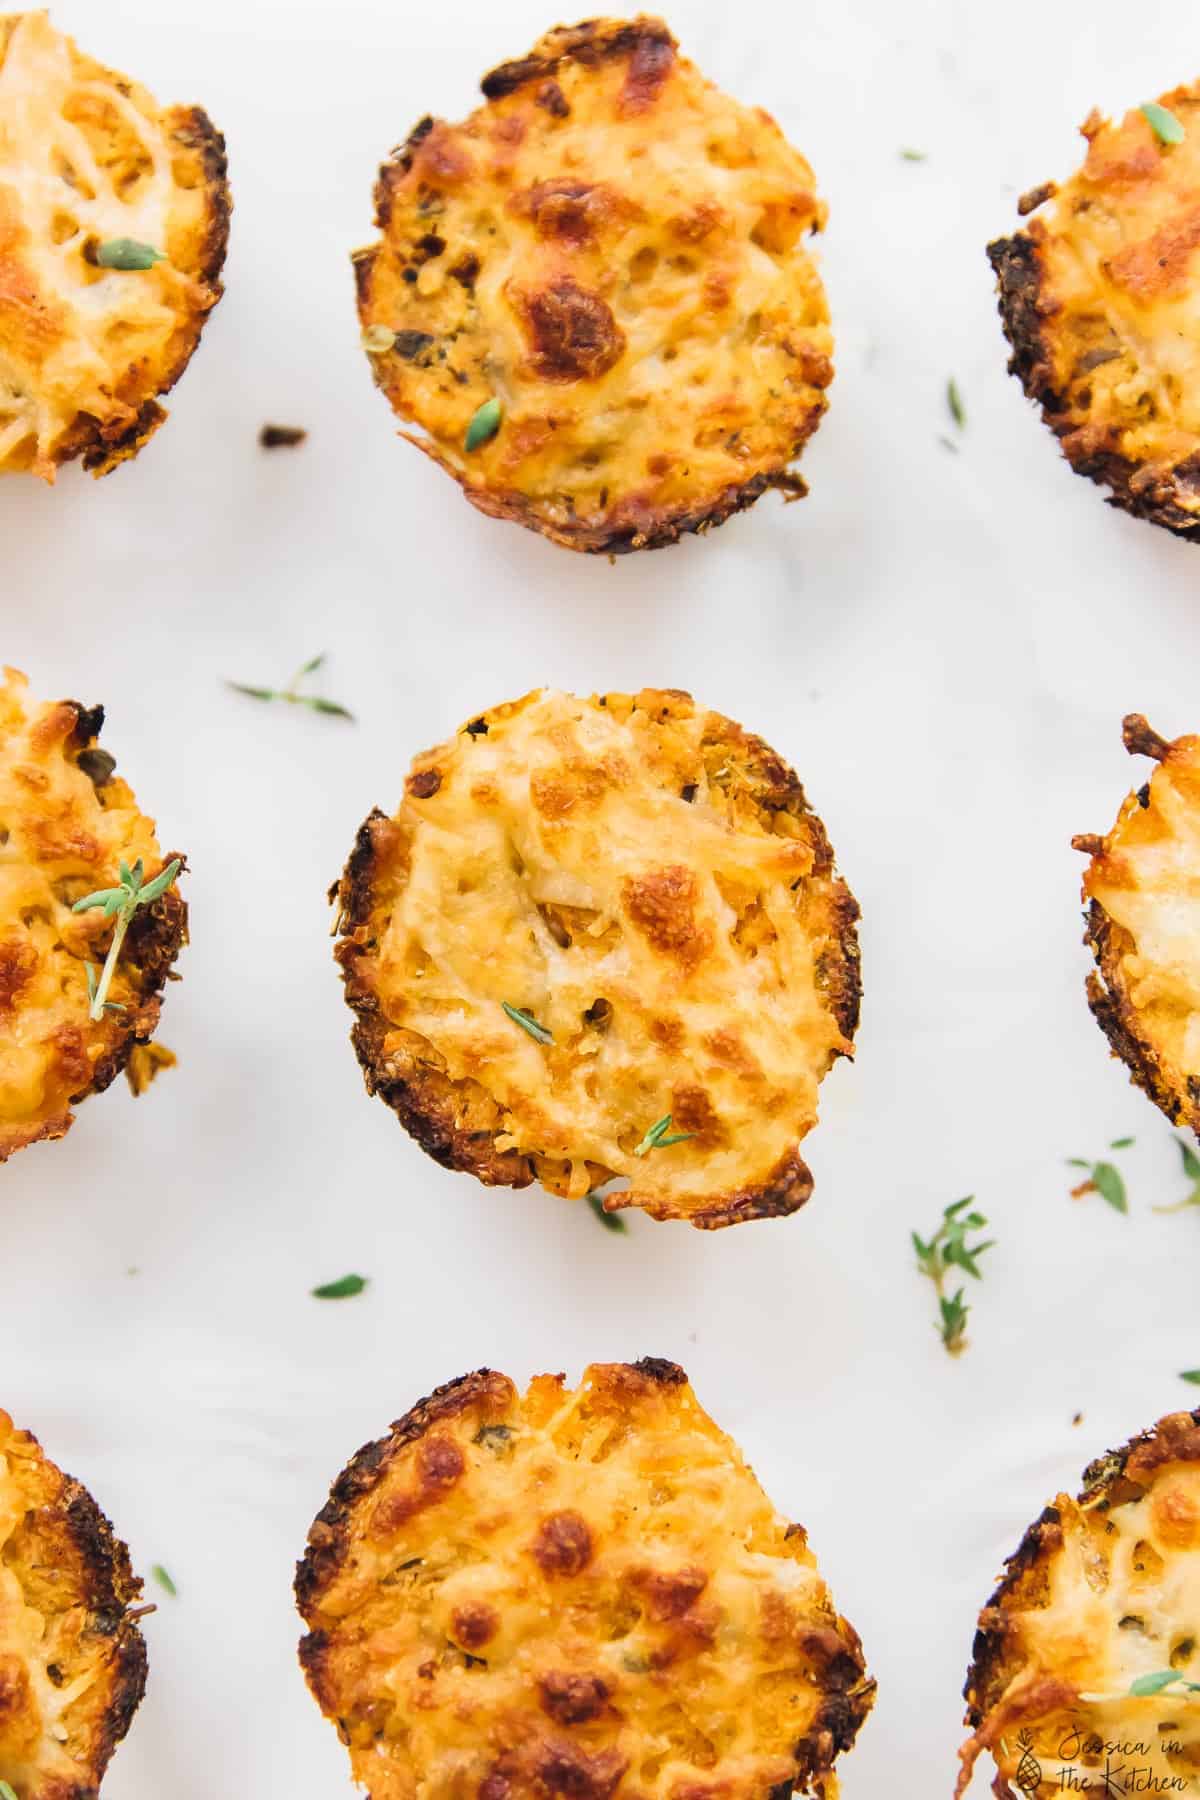 Top down view of cauliflower pizza bites on a white background.